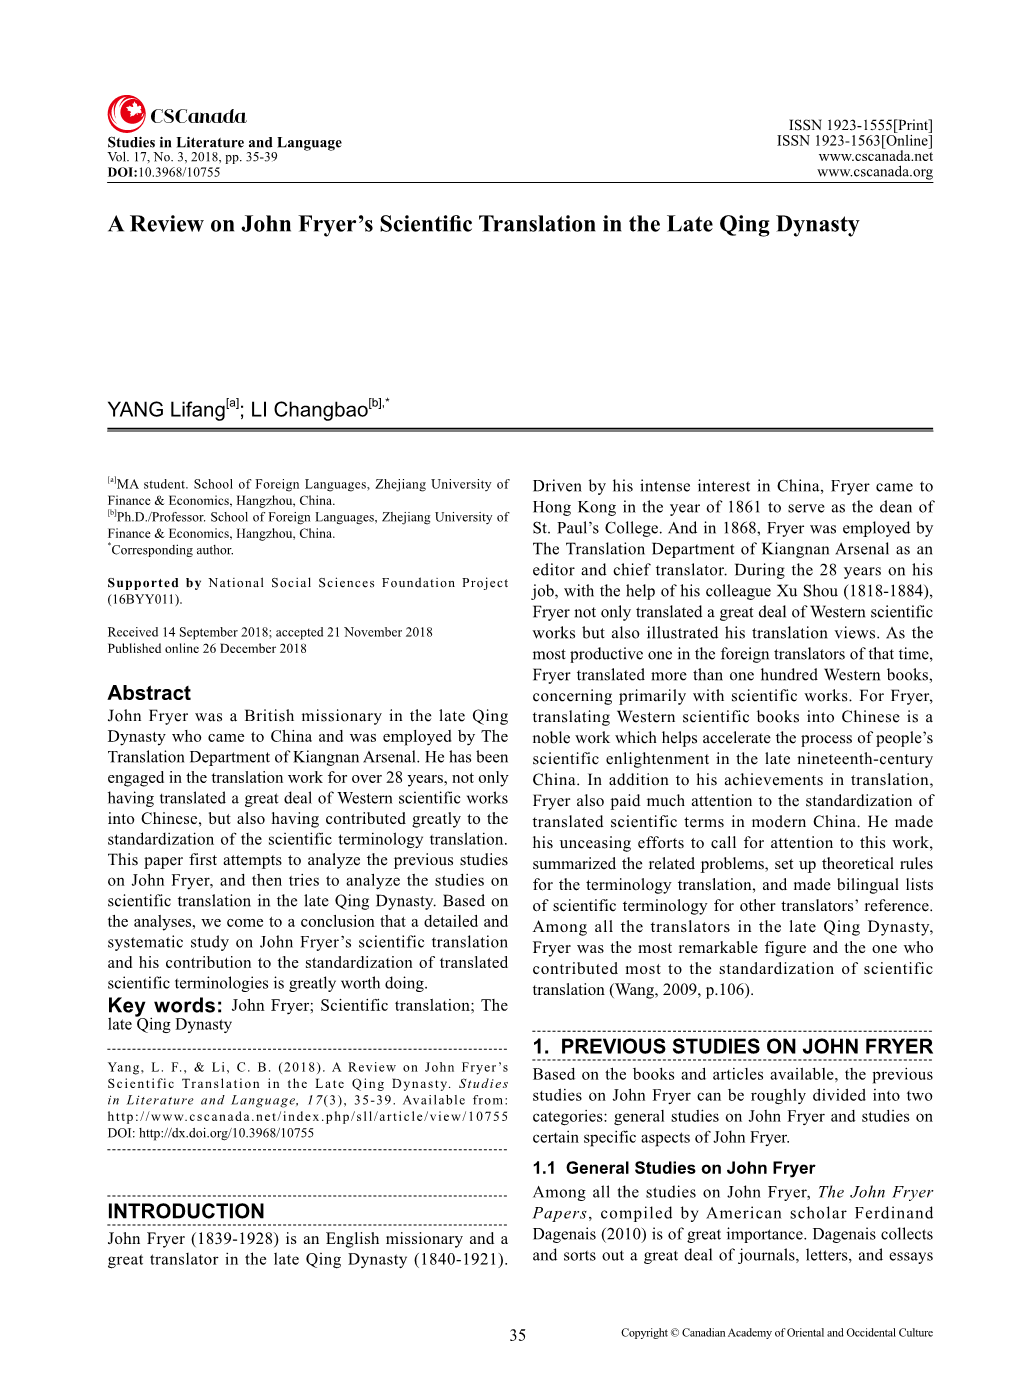 A Review on John Fryer's Scientific Translation in the Late Qing Dynasty